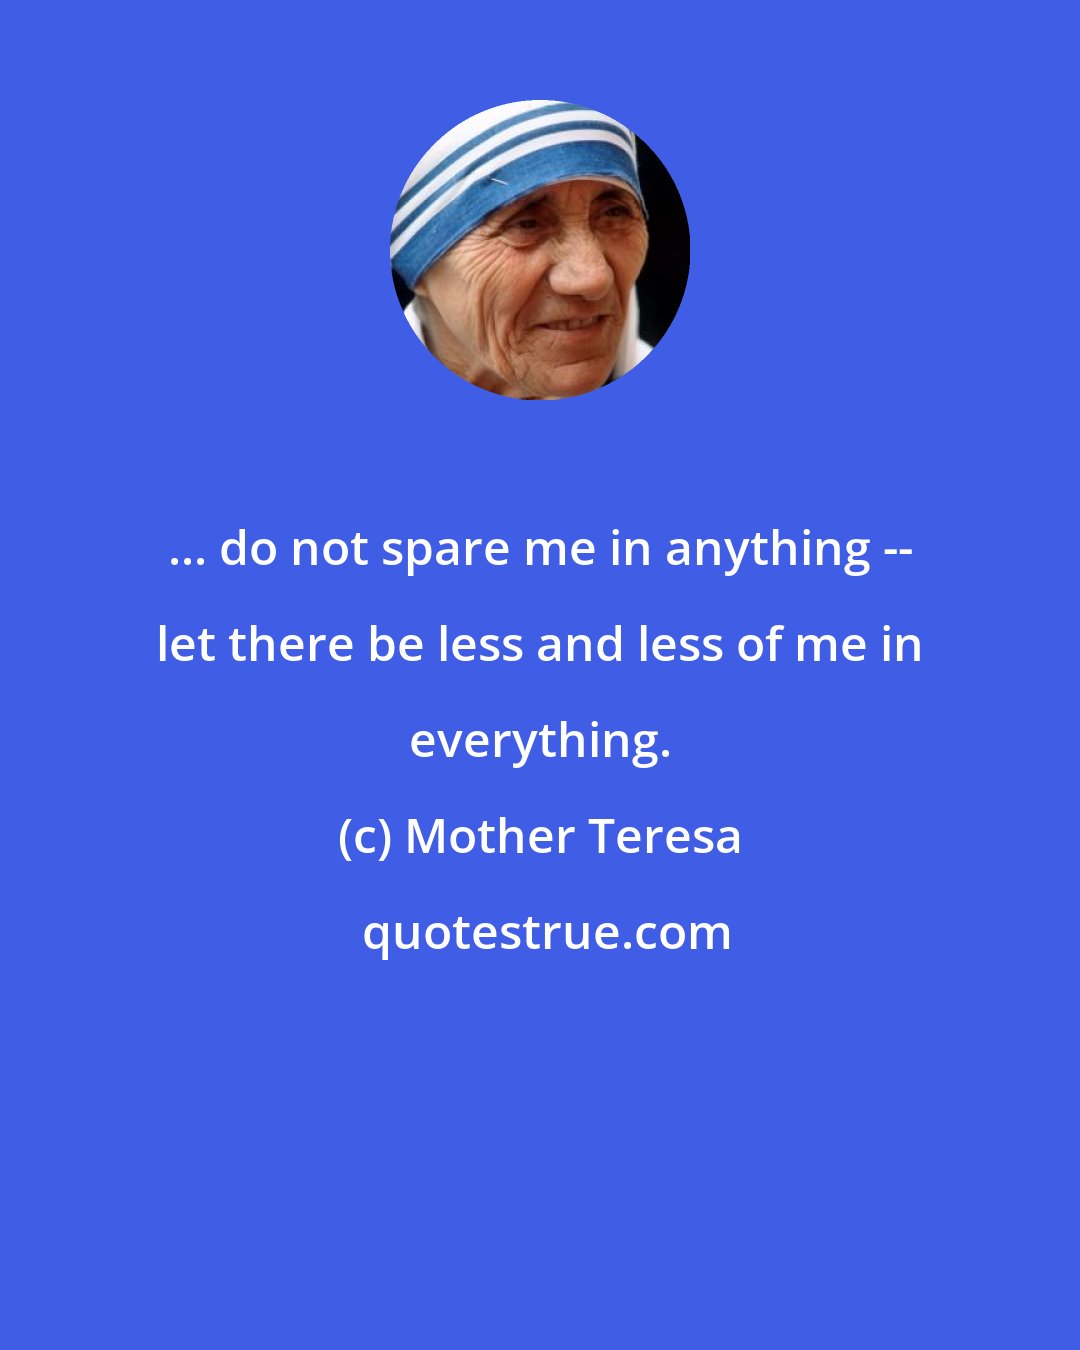 Mother Teresa: ... do not spare me in anything -- let there be less and less of me in everything.